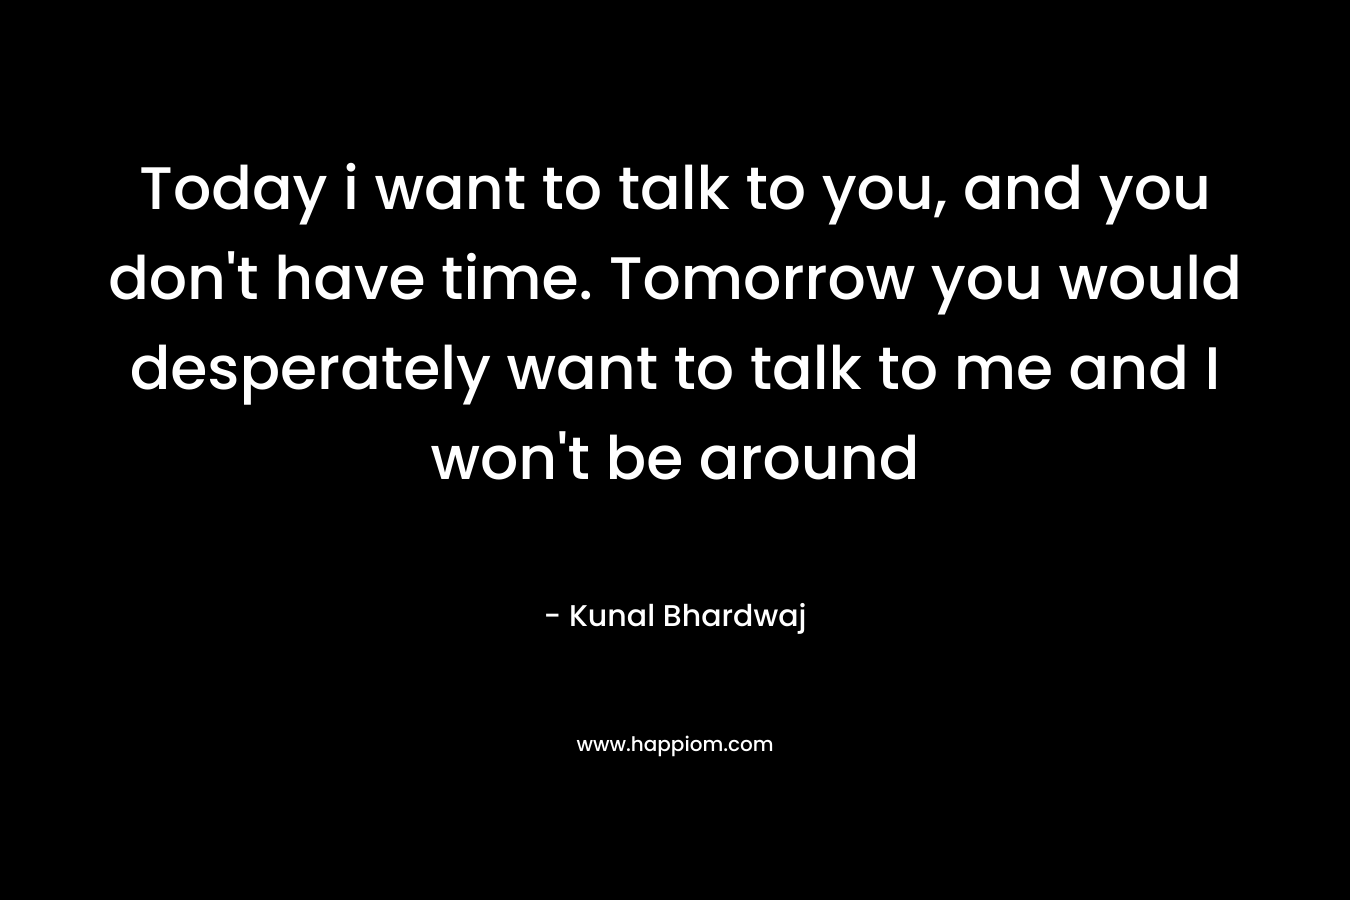 Today i want to talk to you, and you don't have time. Tomorrow you would desperately want to talk to me and I won't be around